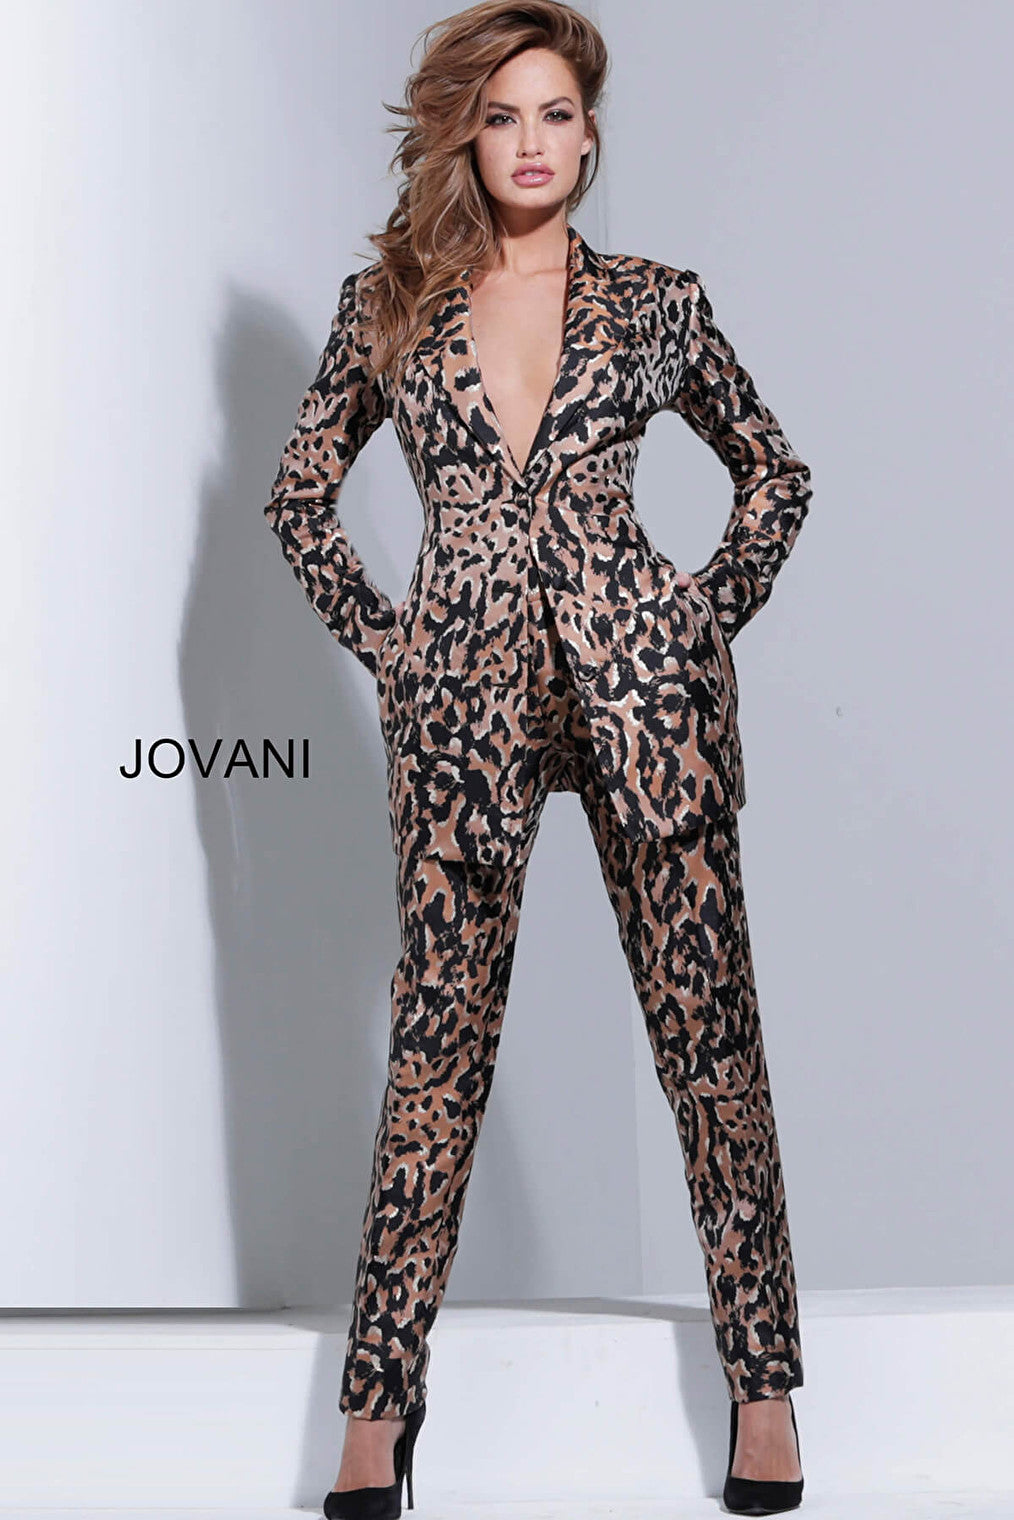 Animal print readsy to wear Jovani pant suit 03840